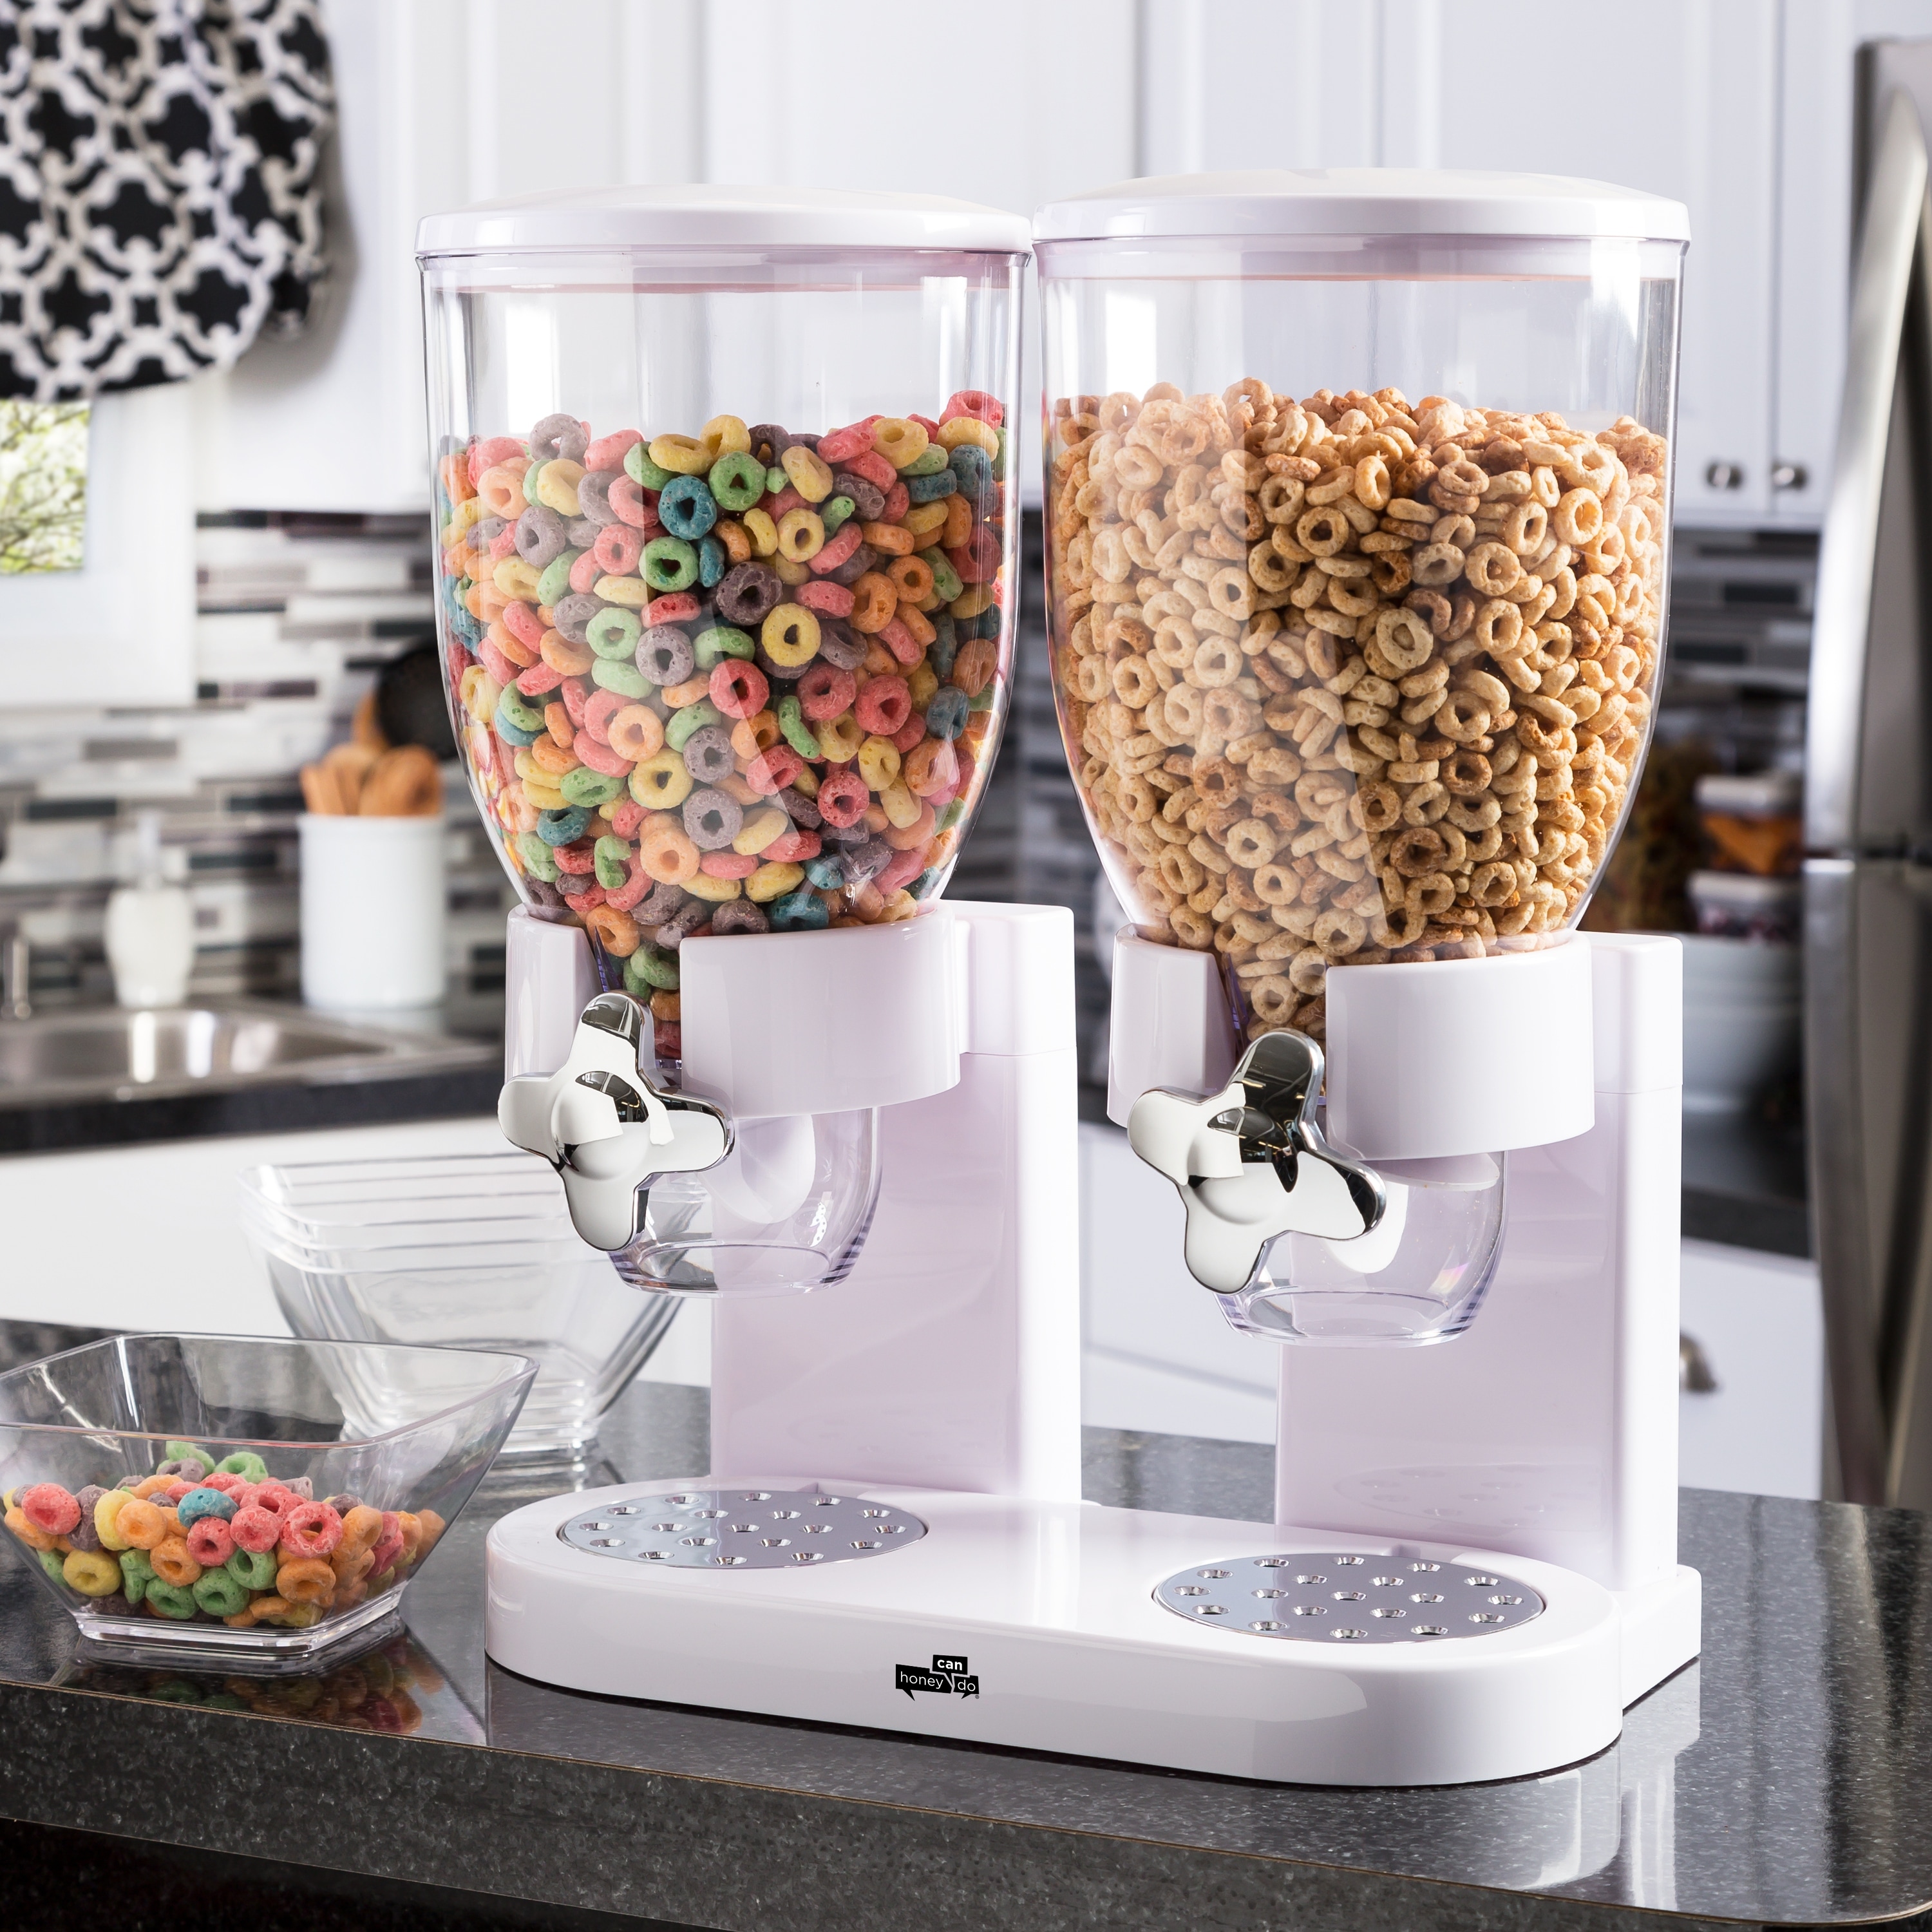 https://ak1.ostkcdn.com/images/products/is/images/direct/0b6797fef3c4c4ffa5c9270eacee4eedff79ddb0/Honey-Can-Do-White-Double-Cereal-Dispenser-with-Portion-Control.jpg